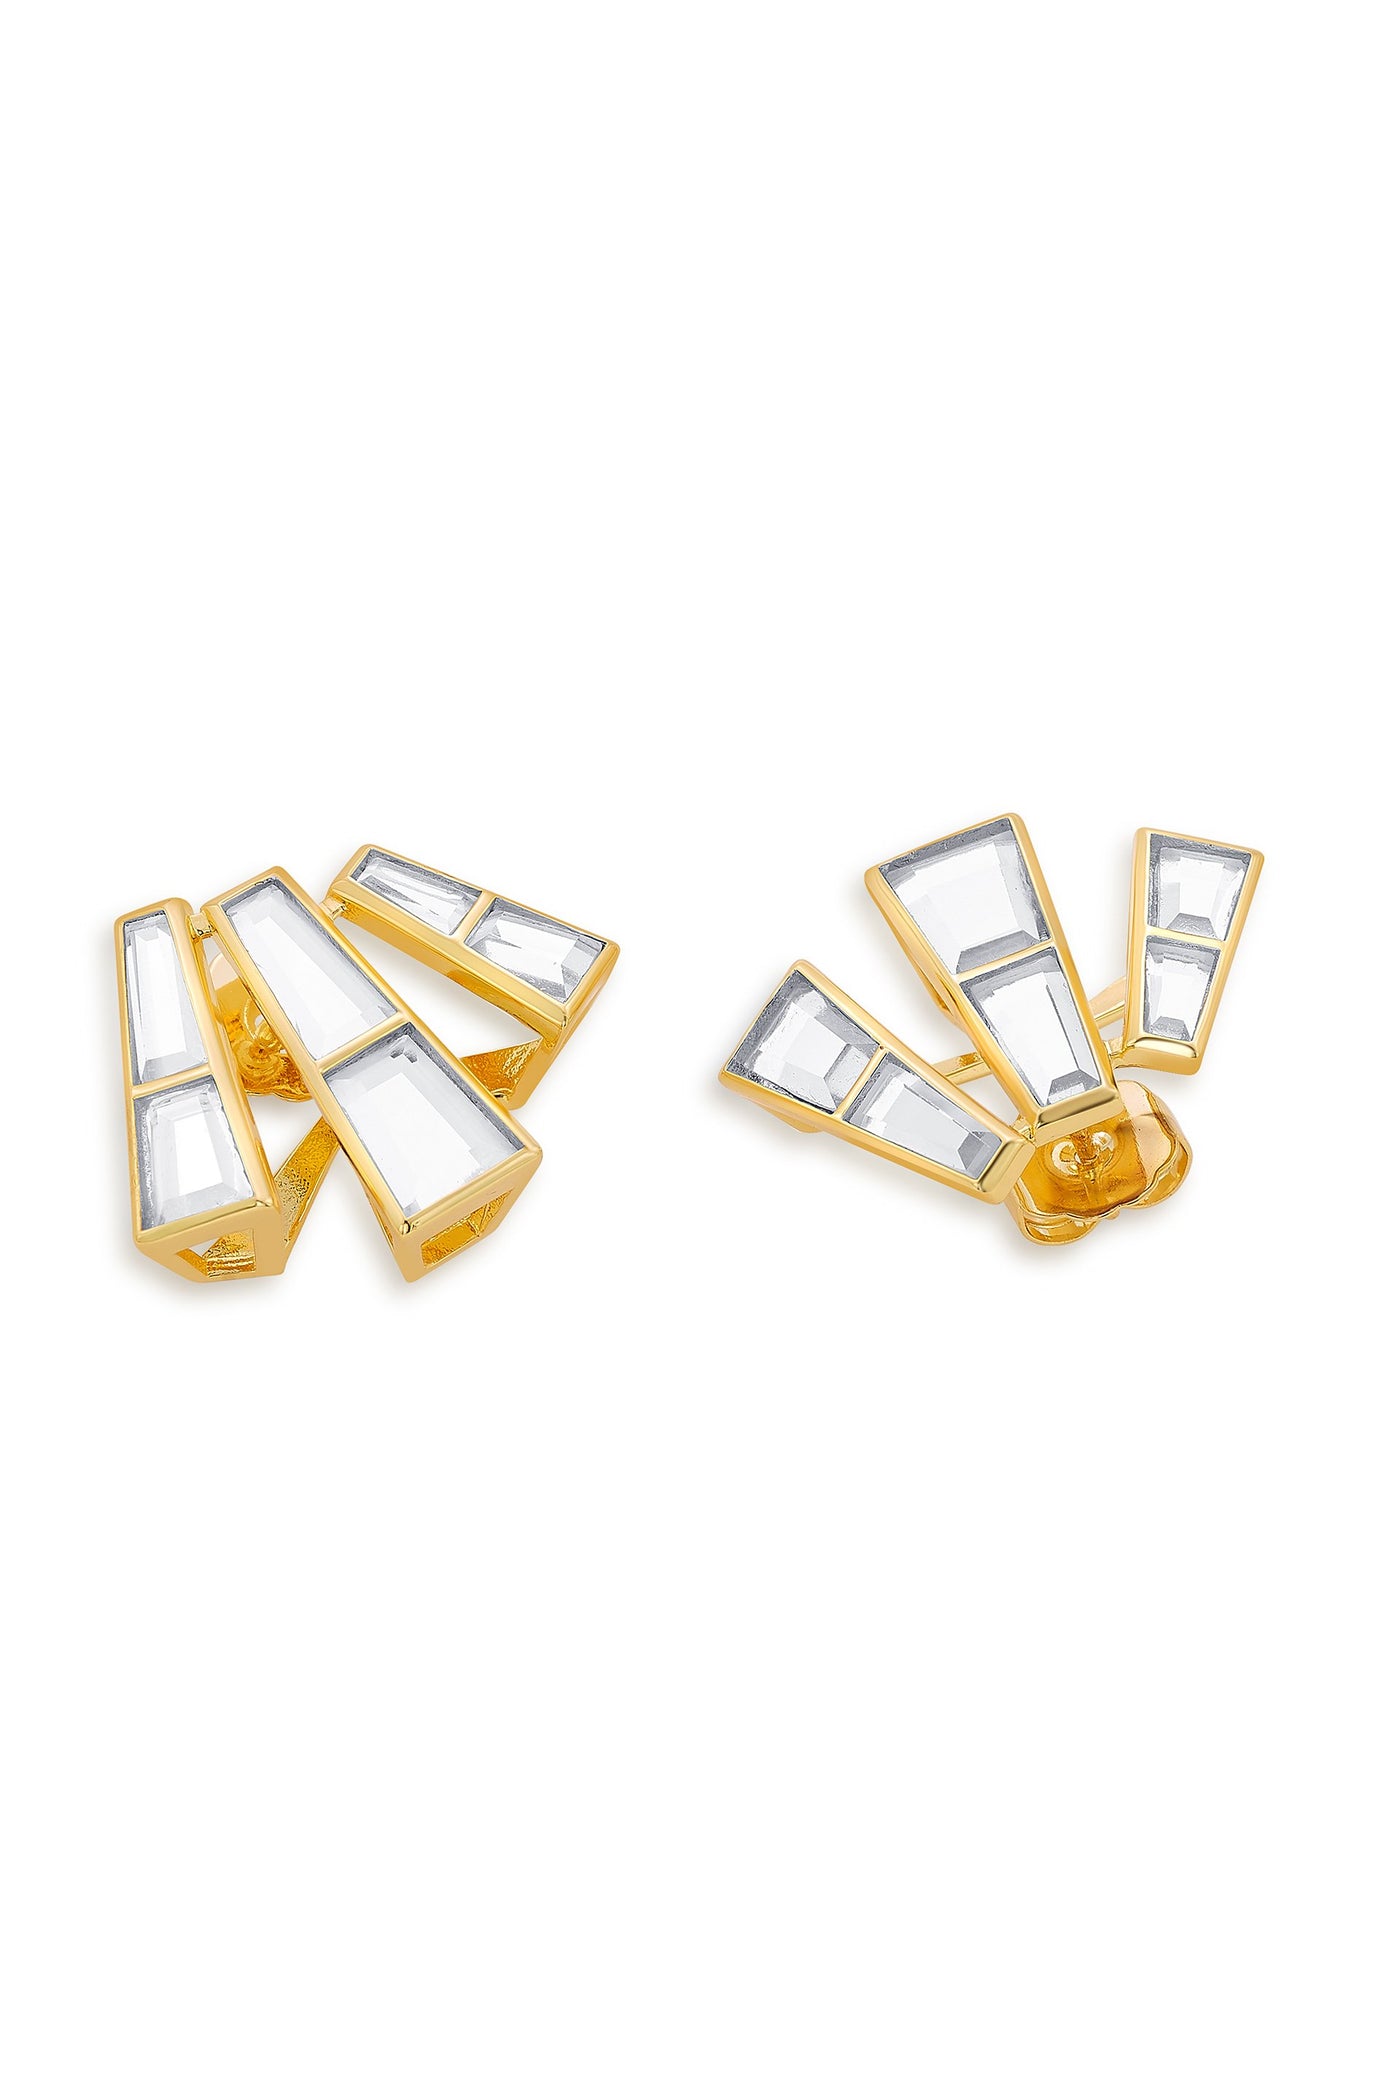 Mirrors on the Move 2.0 Abstract Stud Earrings